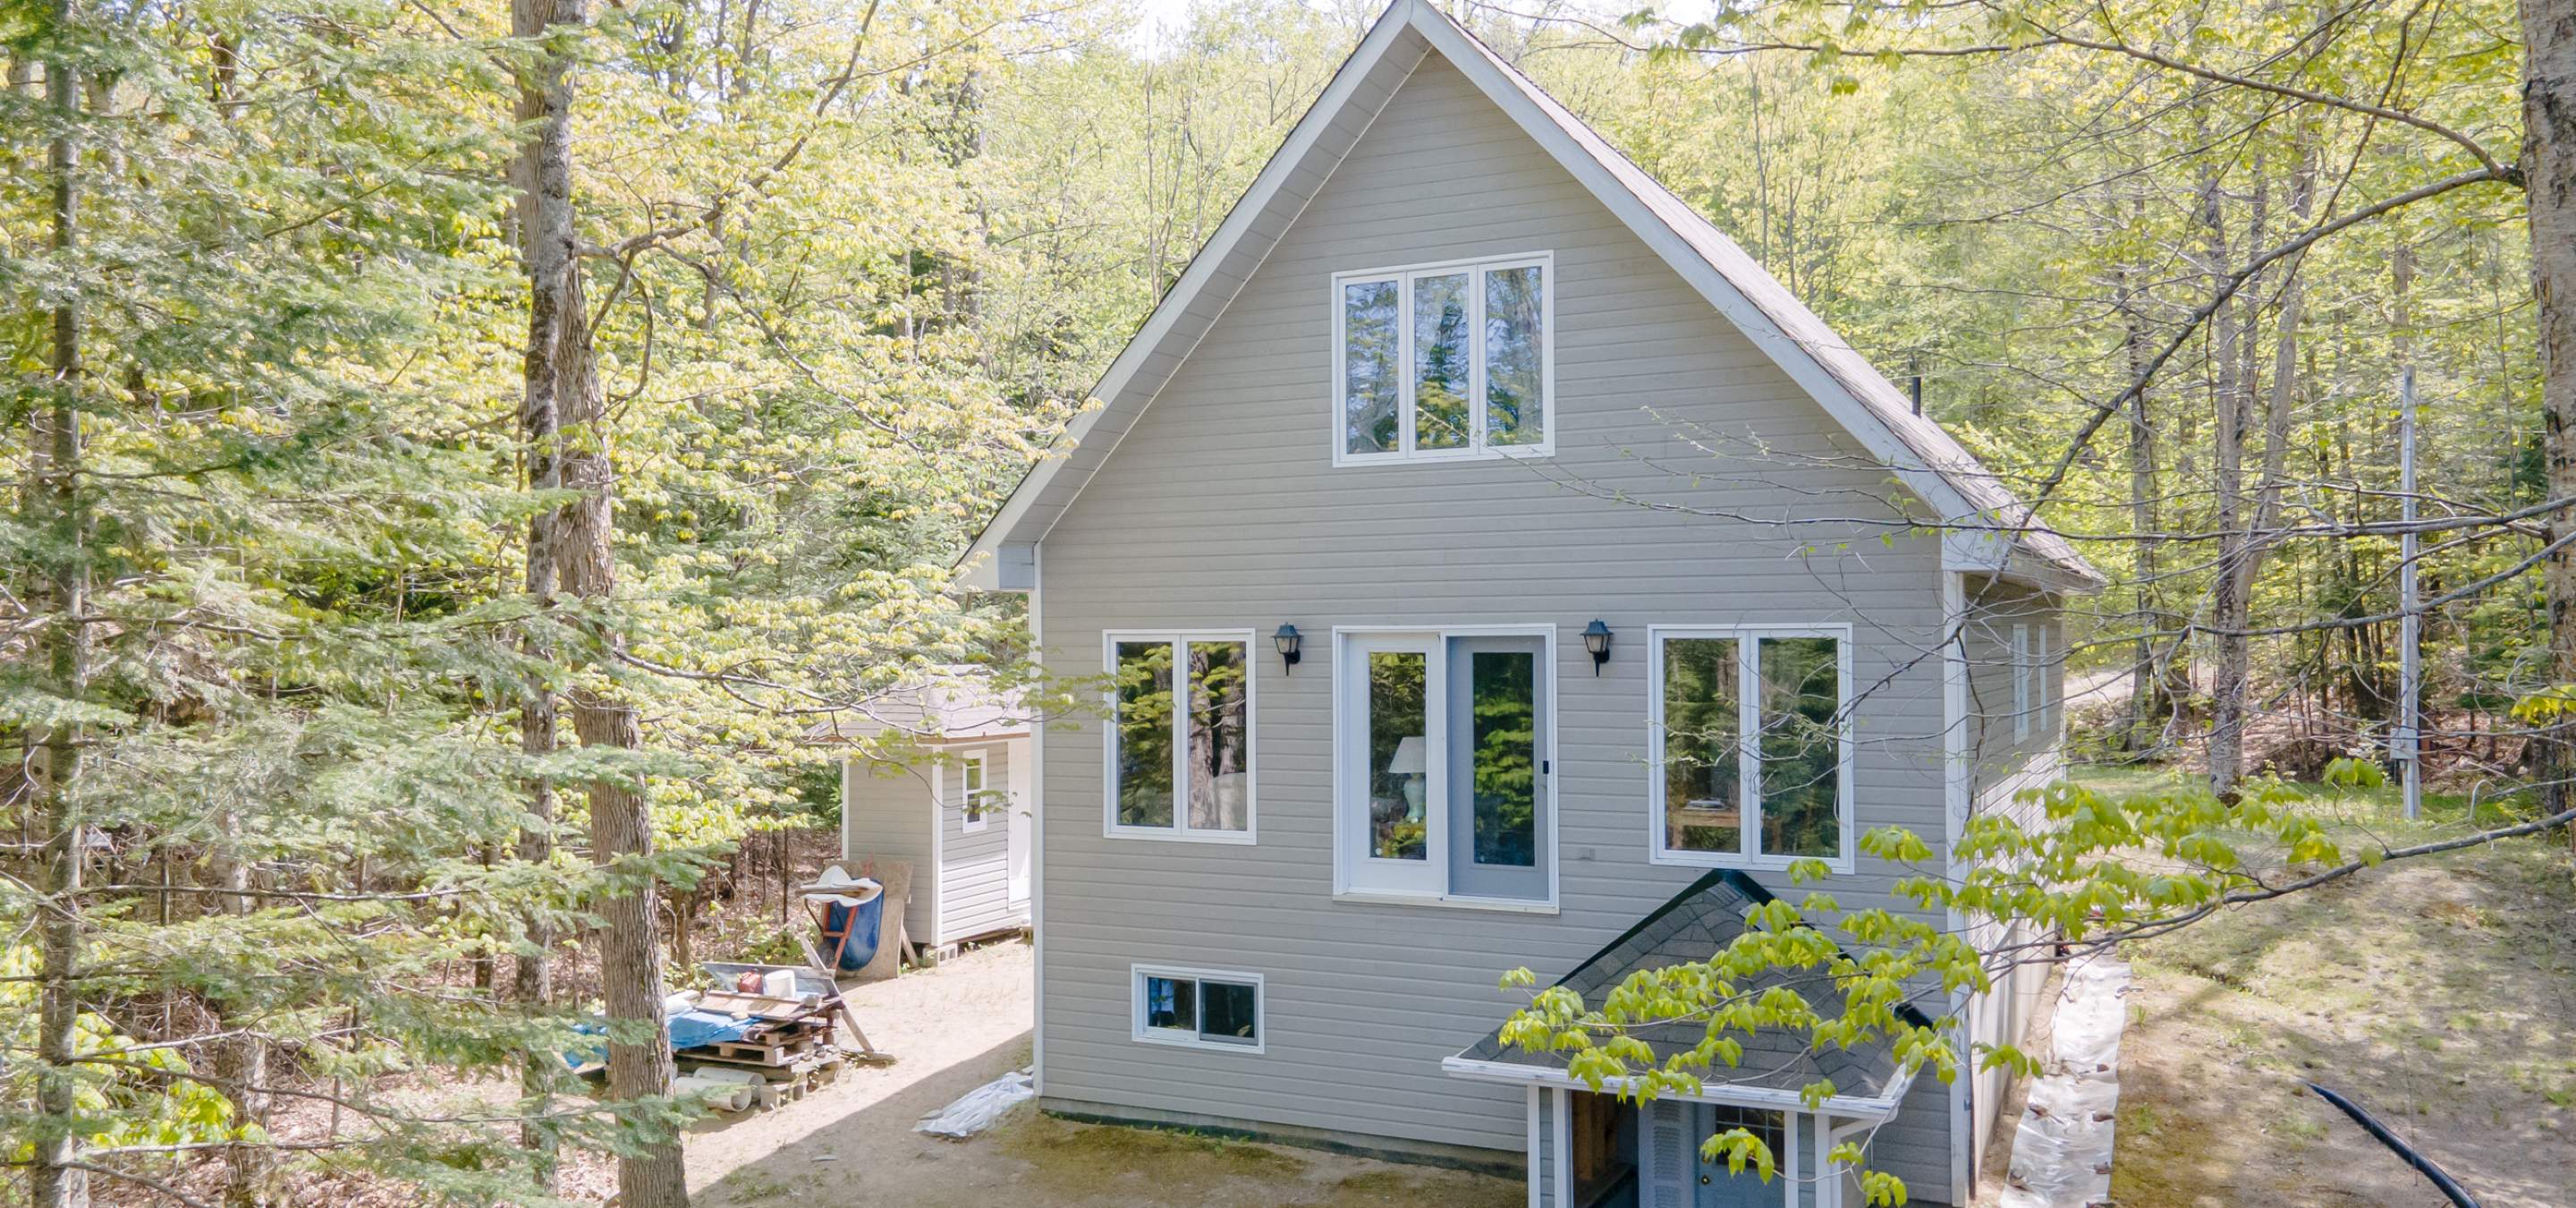 Grey with white trim storey and a half cottage on a level lot surrounded by springtime hardwood trees.